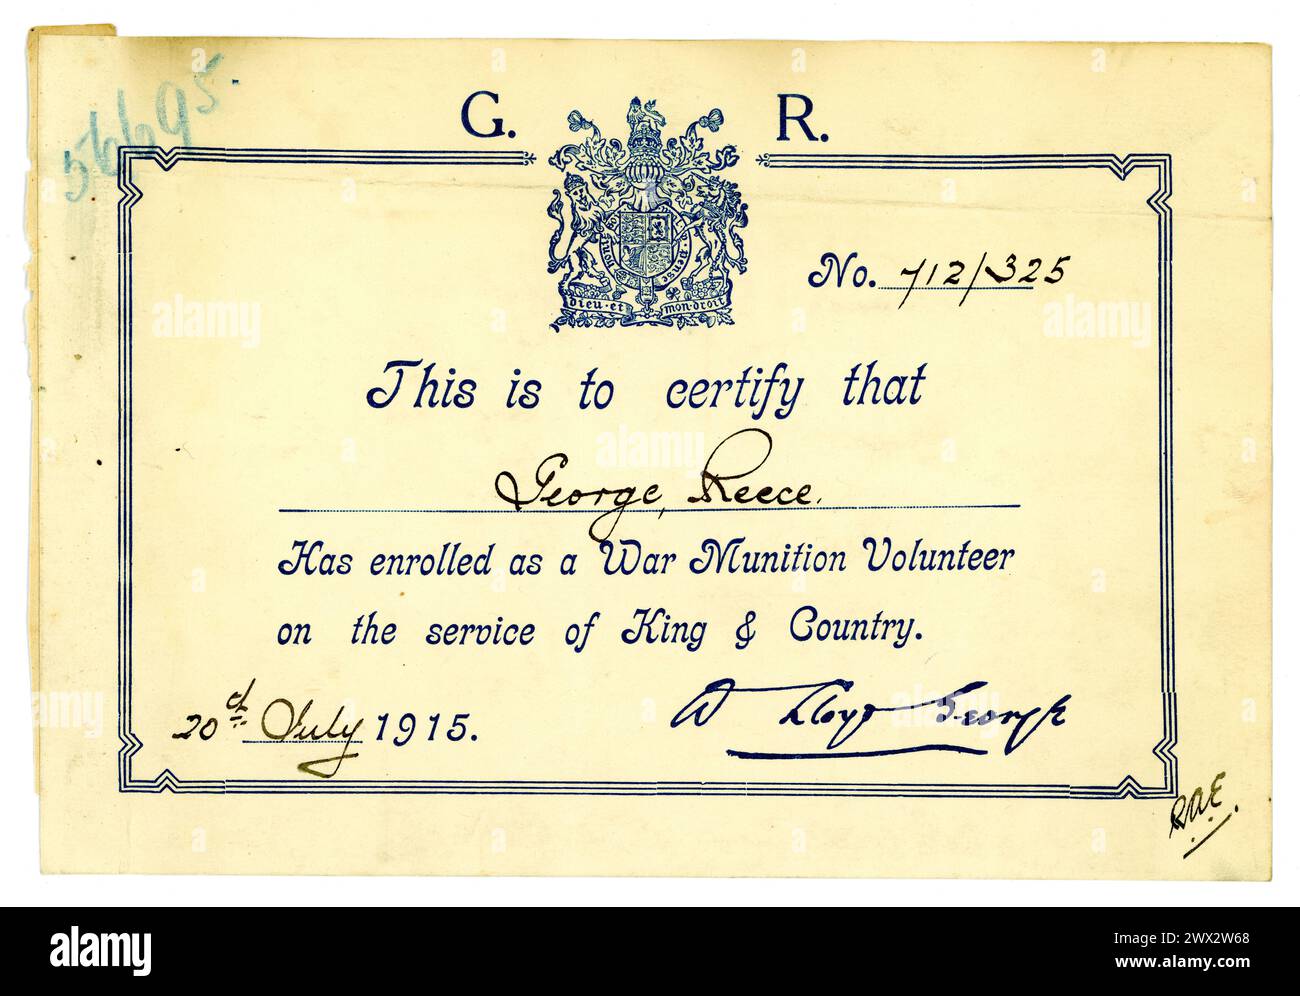 Original WW1 eral War Munition Volunteer enrolment certificate, 'on the service of King and Country', name of George Reece, dated 20th July 1915, U.K. Stock Photo